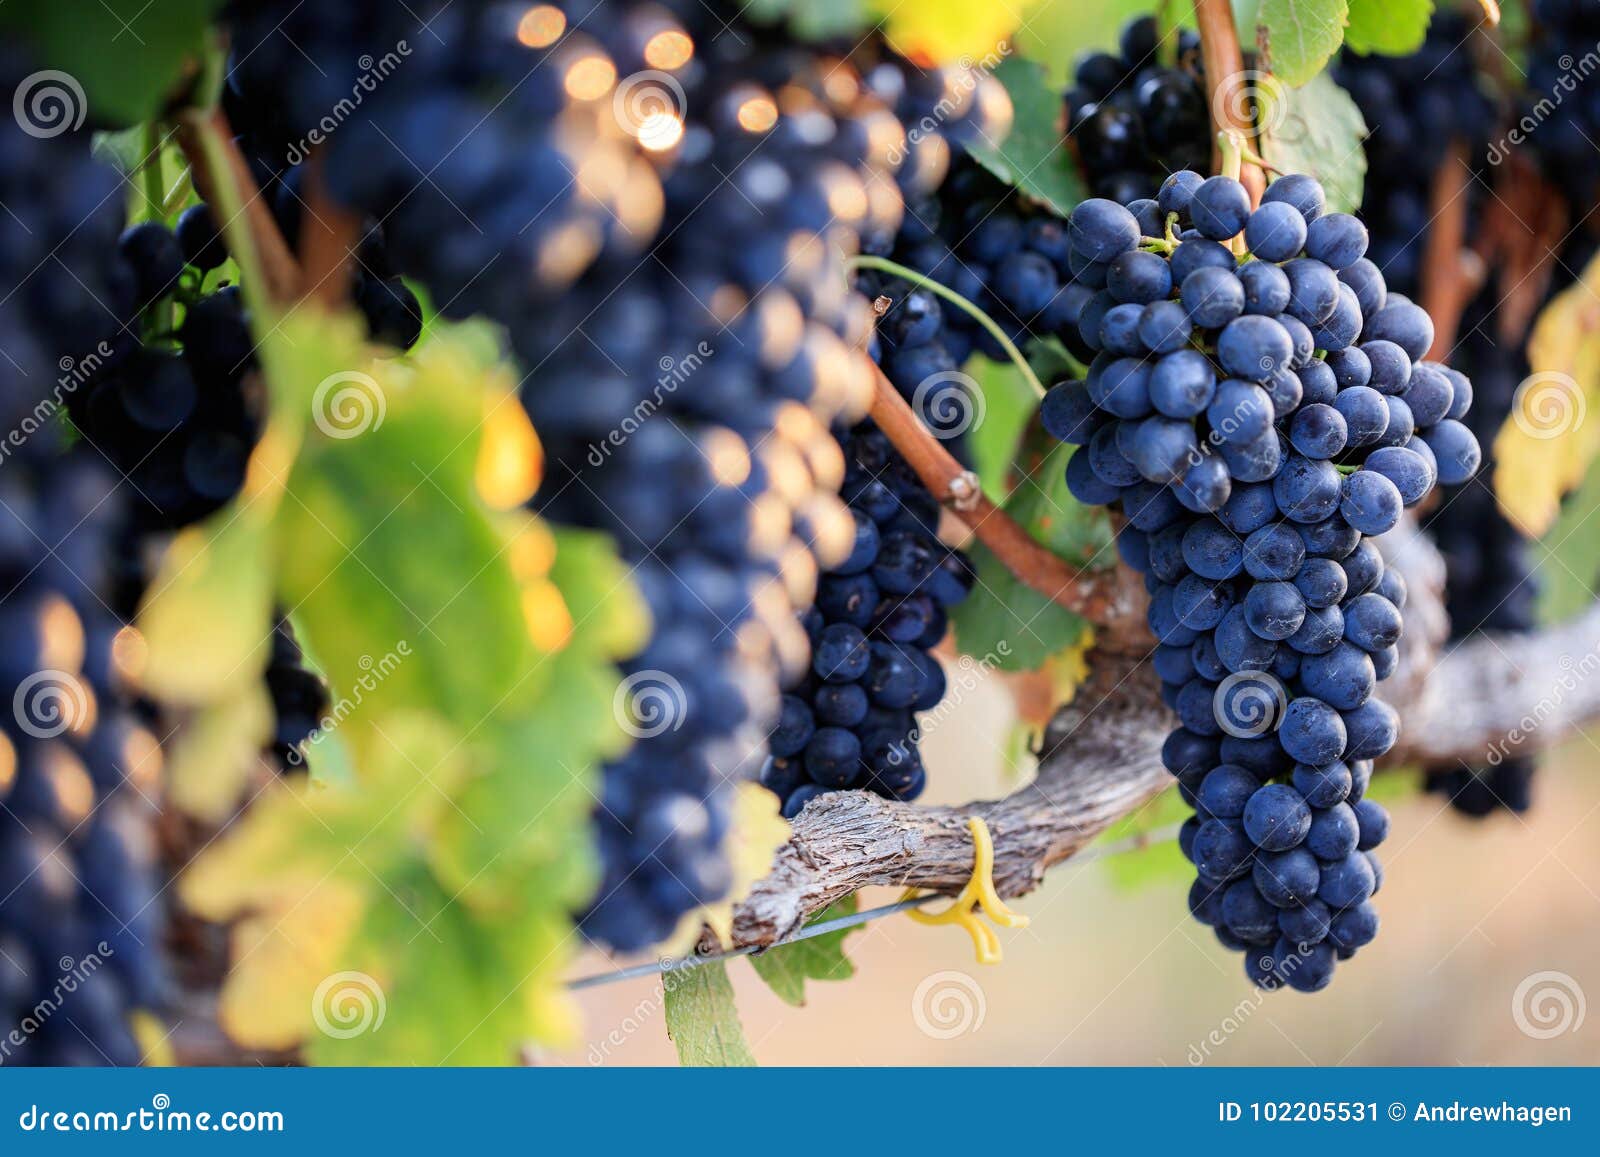 bunches of ripe black grapes on vine row with selective focus